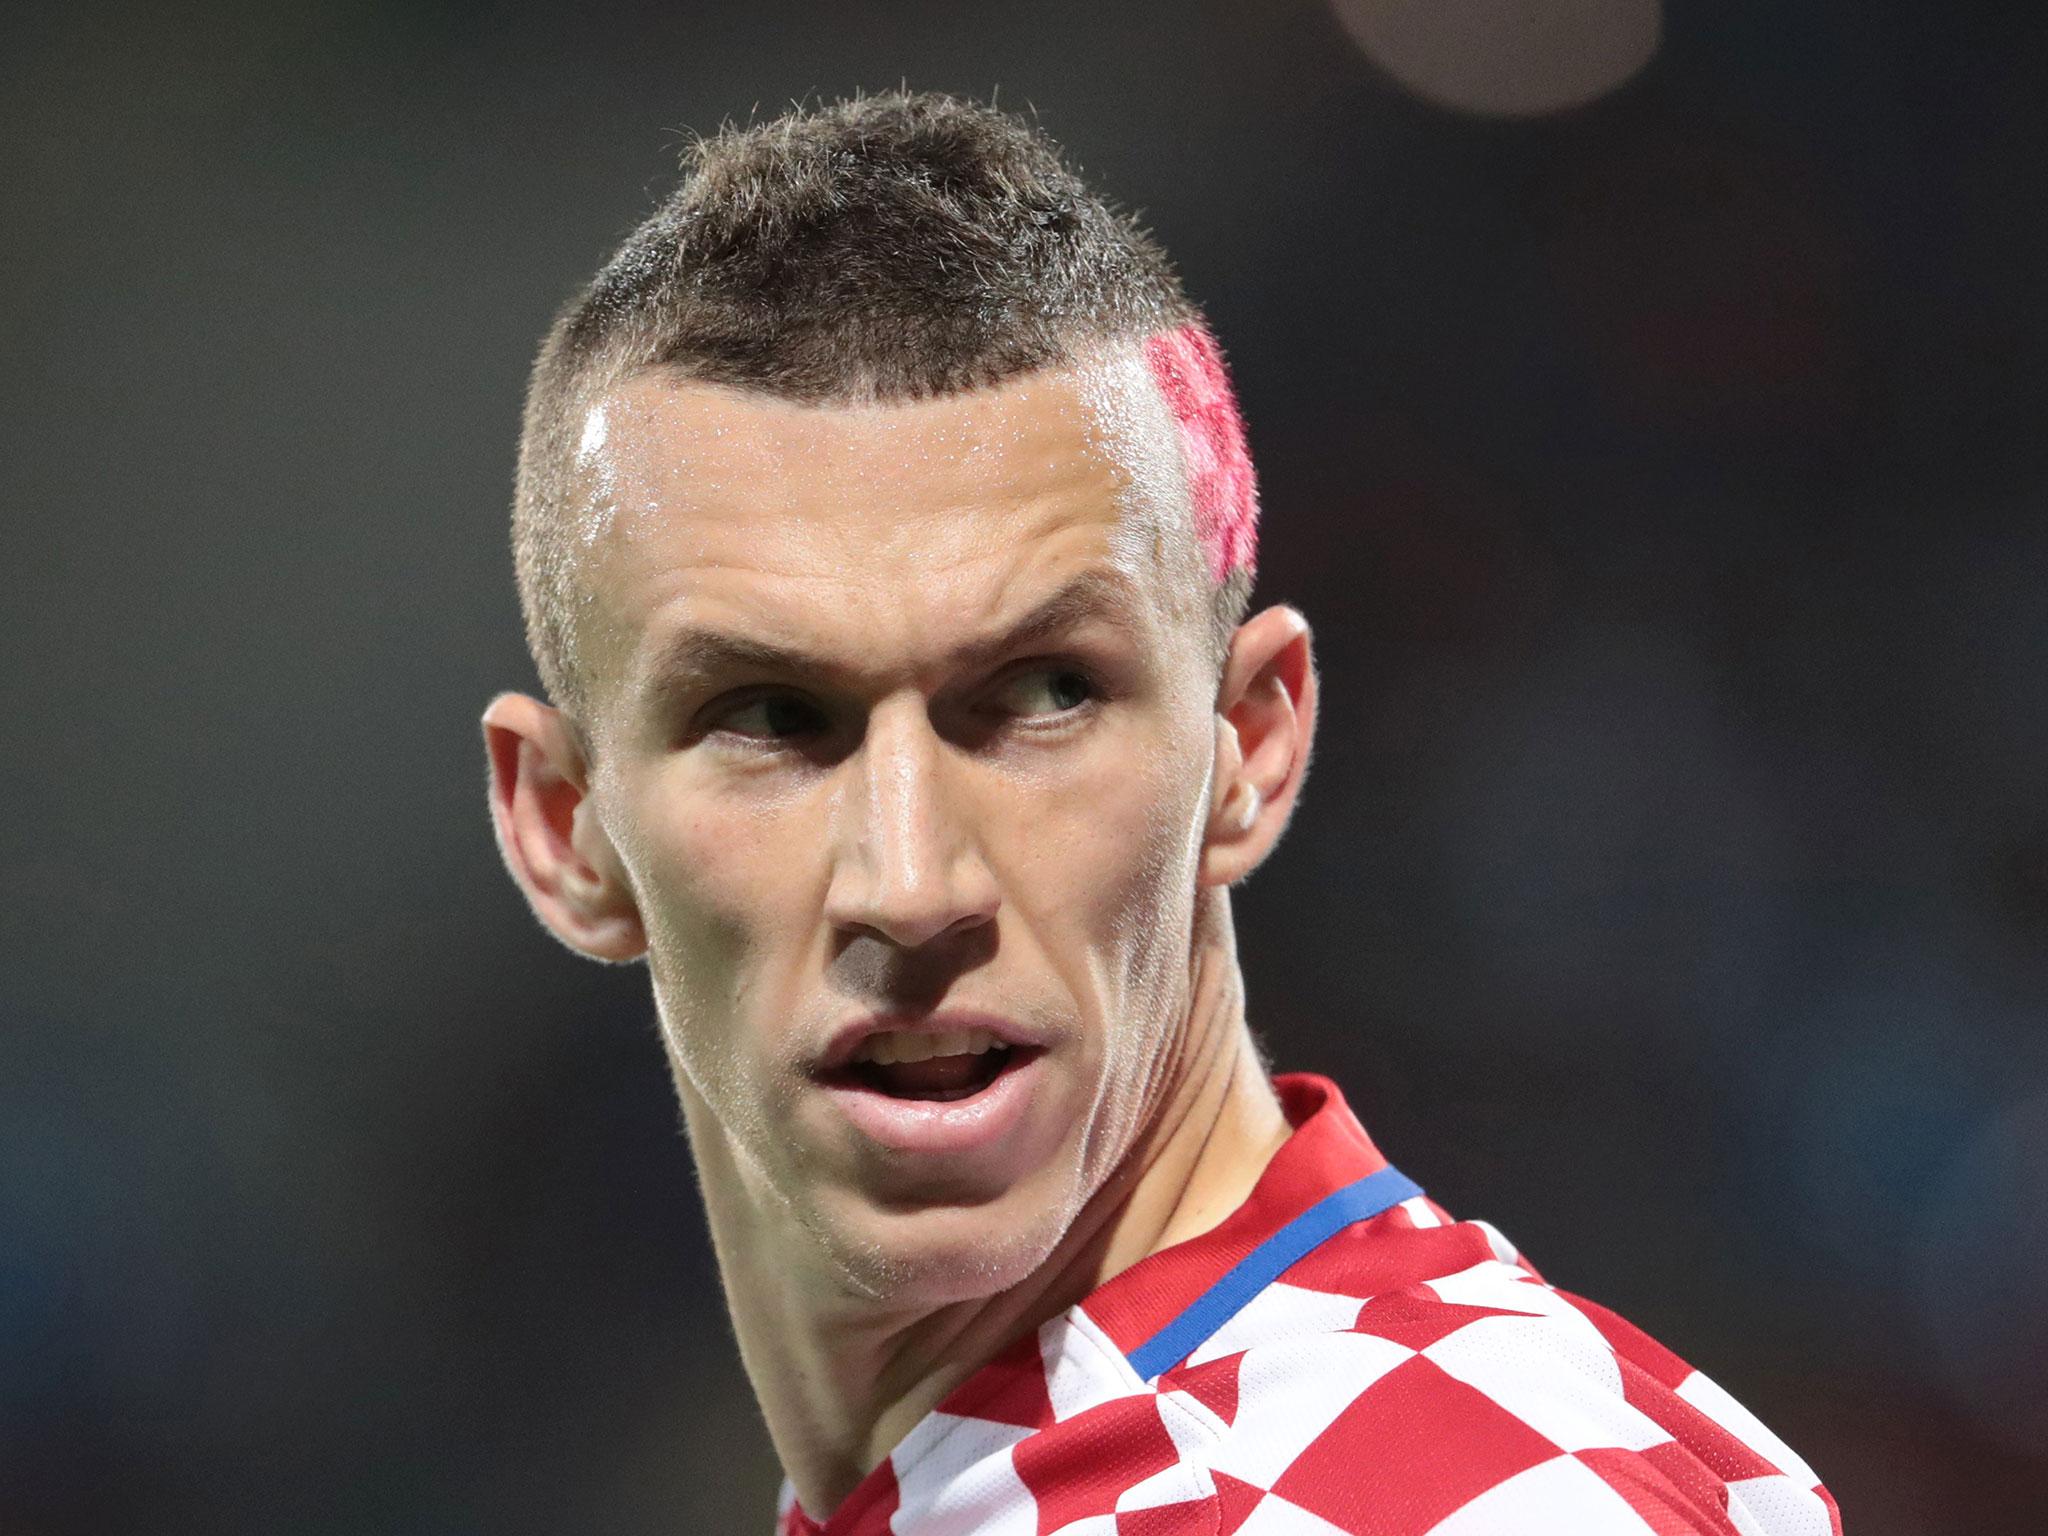 Jose Mourinho has identified Ivan Perisic as one of his top targets but is not willing to let Anthony Martial go the other way